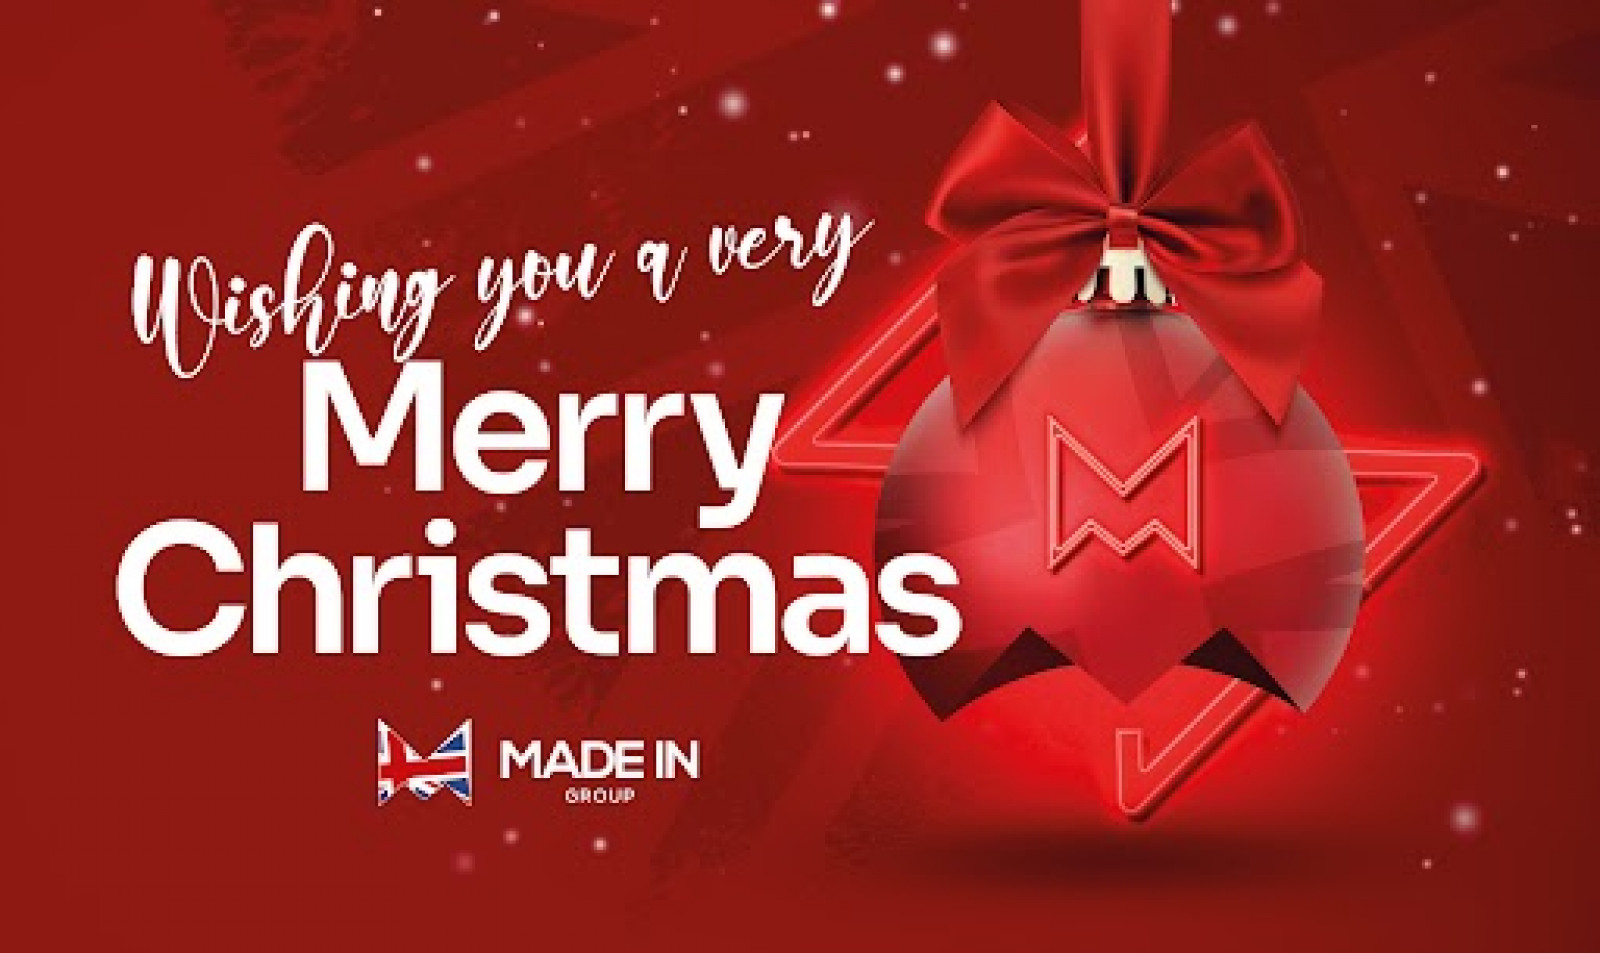 Wishing Made Members a Merry Christmas and Happy New Year